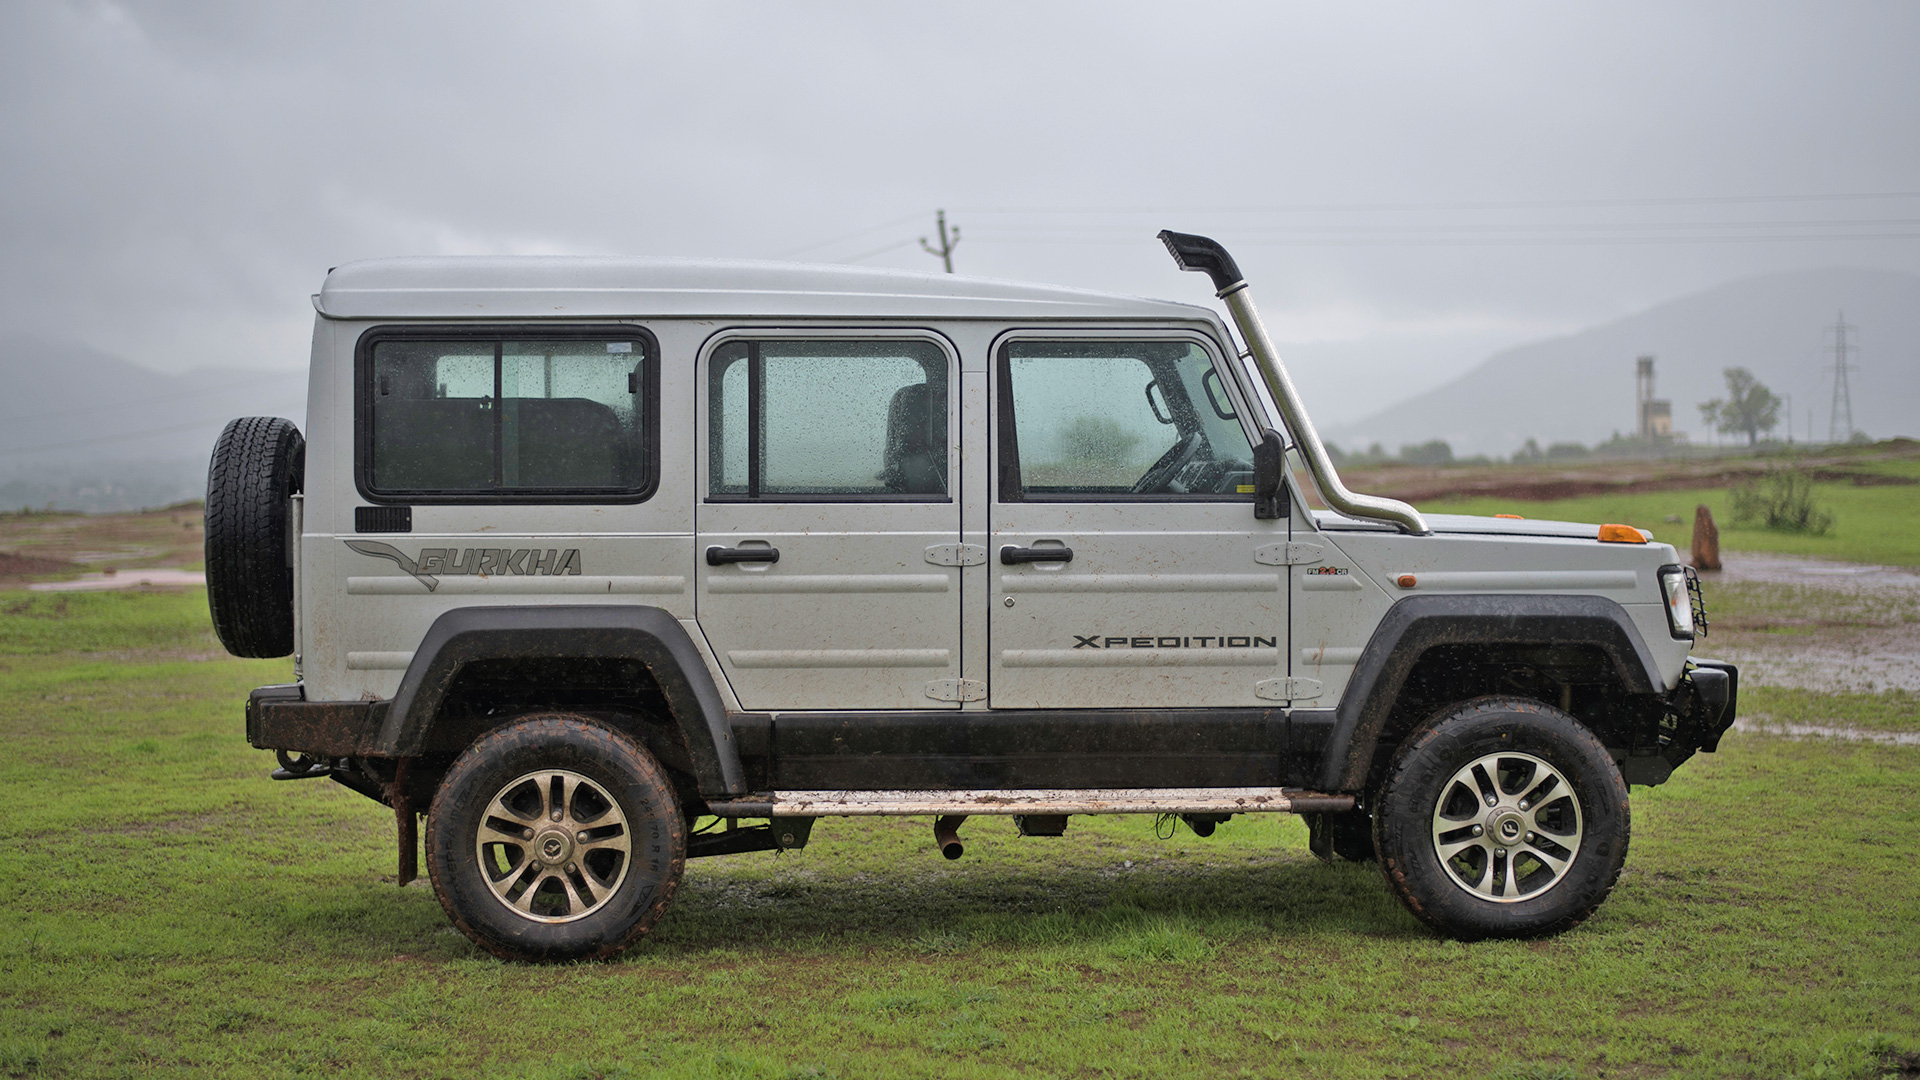 Force Gurkha 2019 Xpedition 5 Door Price Mileage Reviews